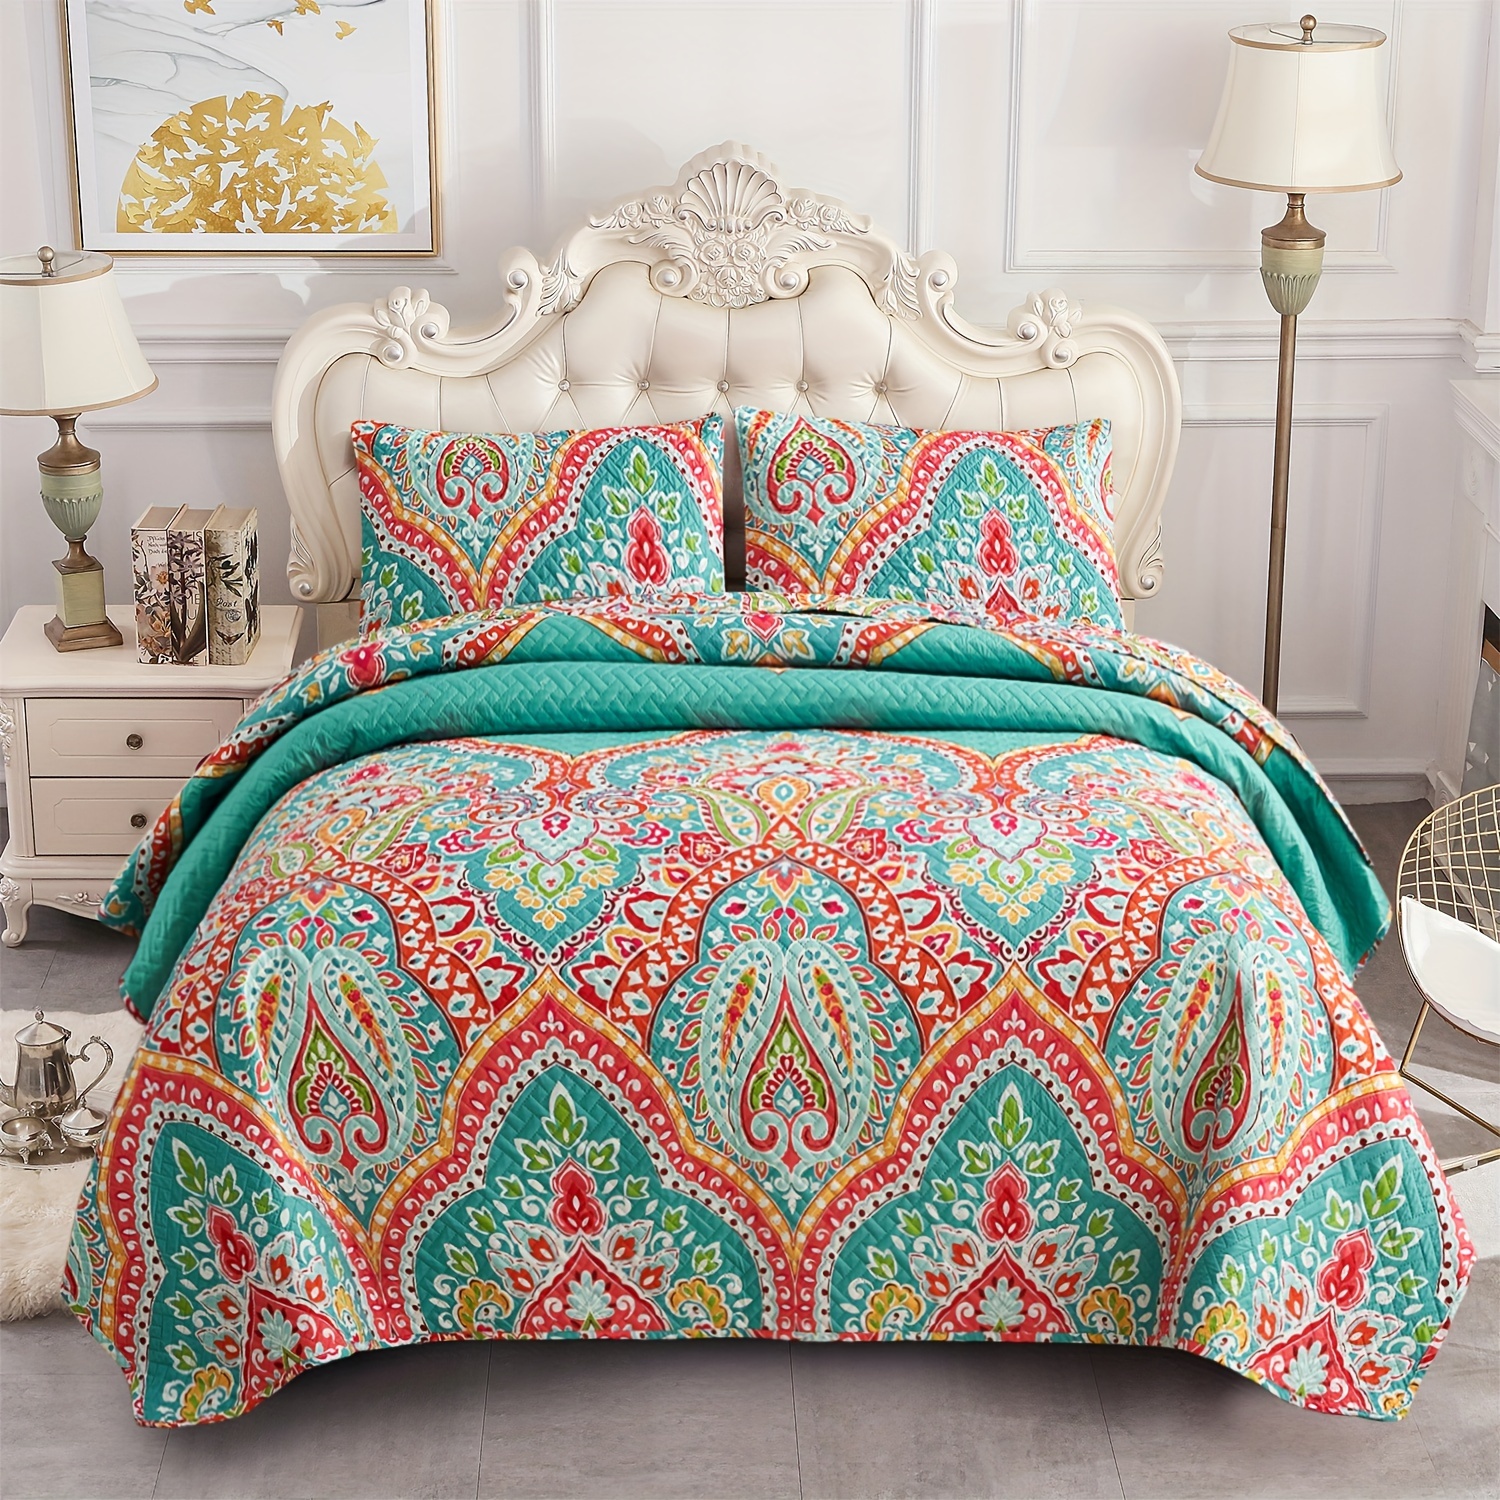 

3-pcs Boho Floral Bedspread Set (1*bedspread + 2*pillowcase Without Filler), Soft Breathable And Comfortable Bedding Bedspread Coverlet Set Queen&king For All Season Fits Any Decro